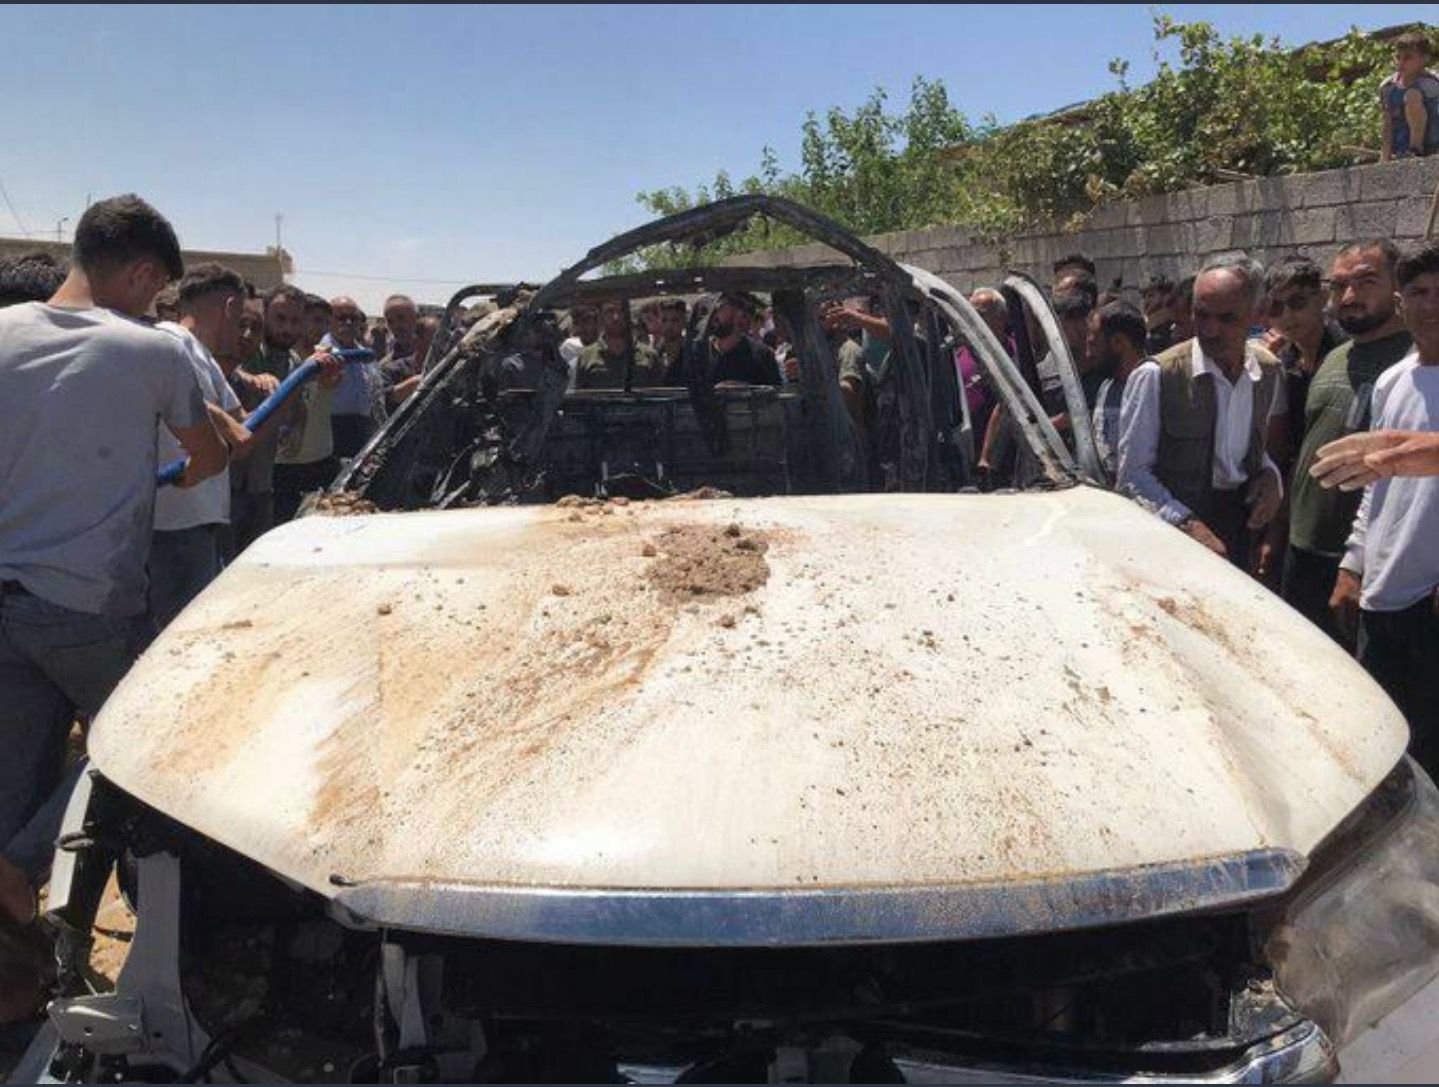 Onlookers inspect the PKK terrorist&#039;s vehicle following a Turkish intelligence operation in northern Iraq, in this photo released on May 23, 2022. (DHA Photo)